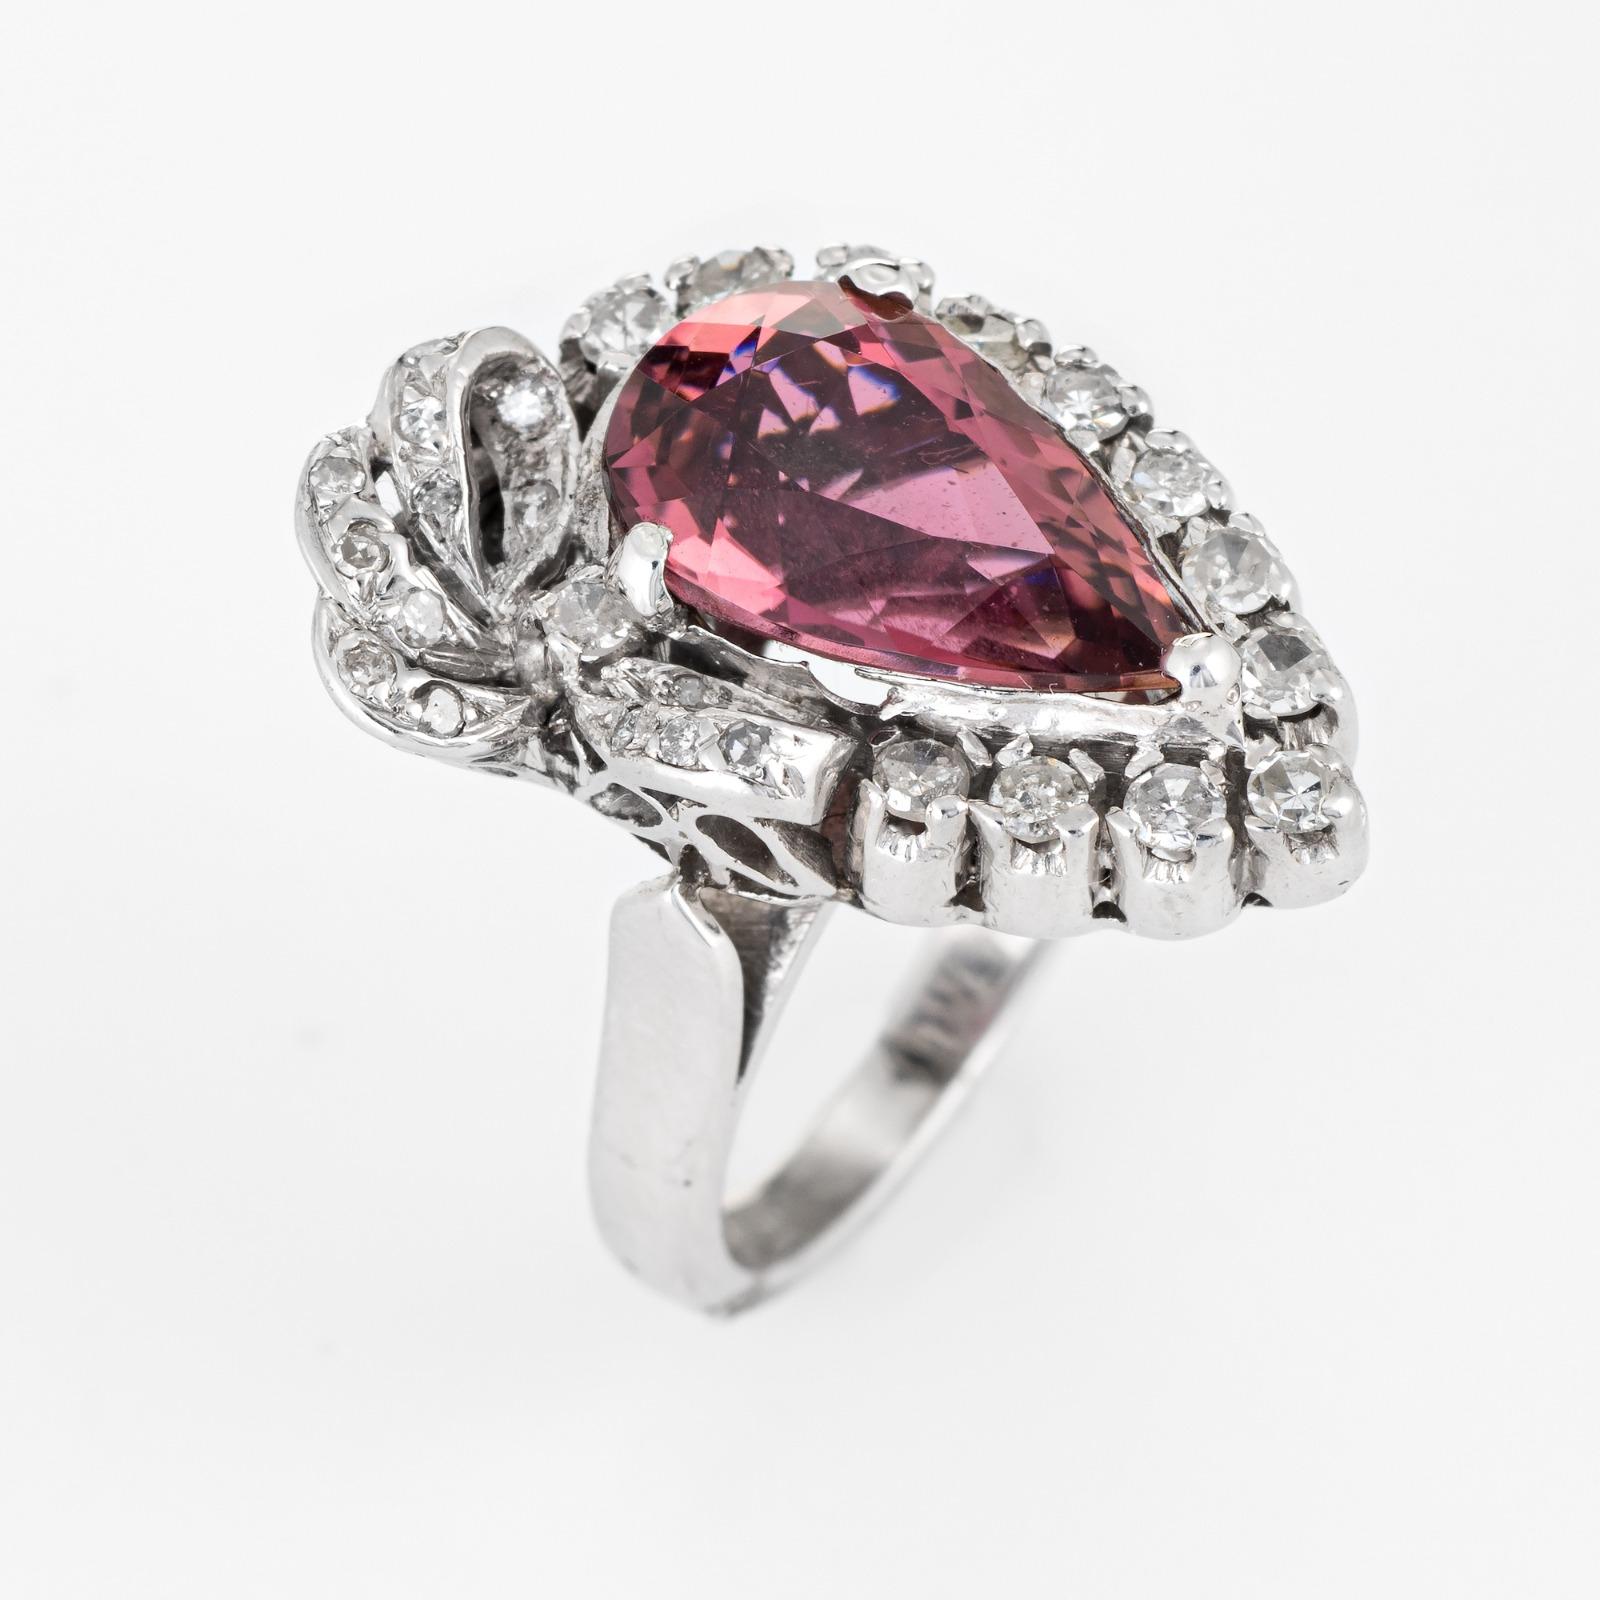 Stylish vintage pink tourmaline & diamond cocktail ring (circa 1940s to 1950s), crafted in 10 karat white gold

One pear cut pink tourmaline is estimated at 3 carats, accented with an estimated .24 carats of diamonds (estimated at J-K color and I1-3